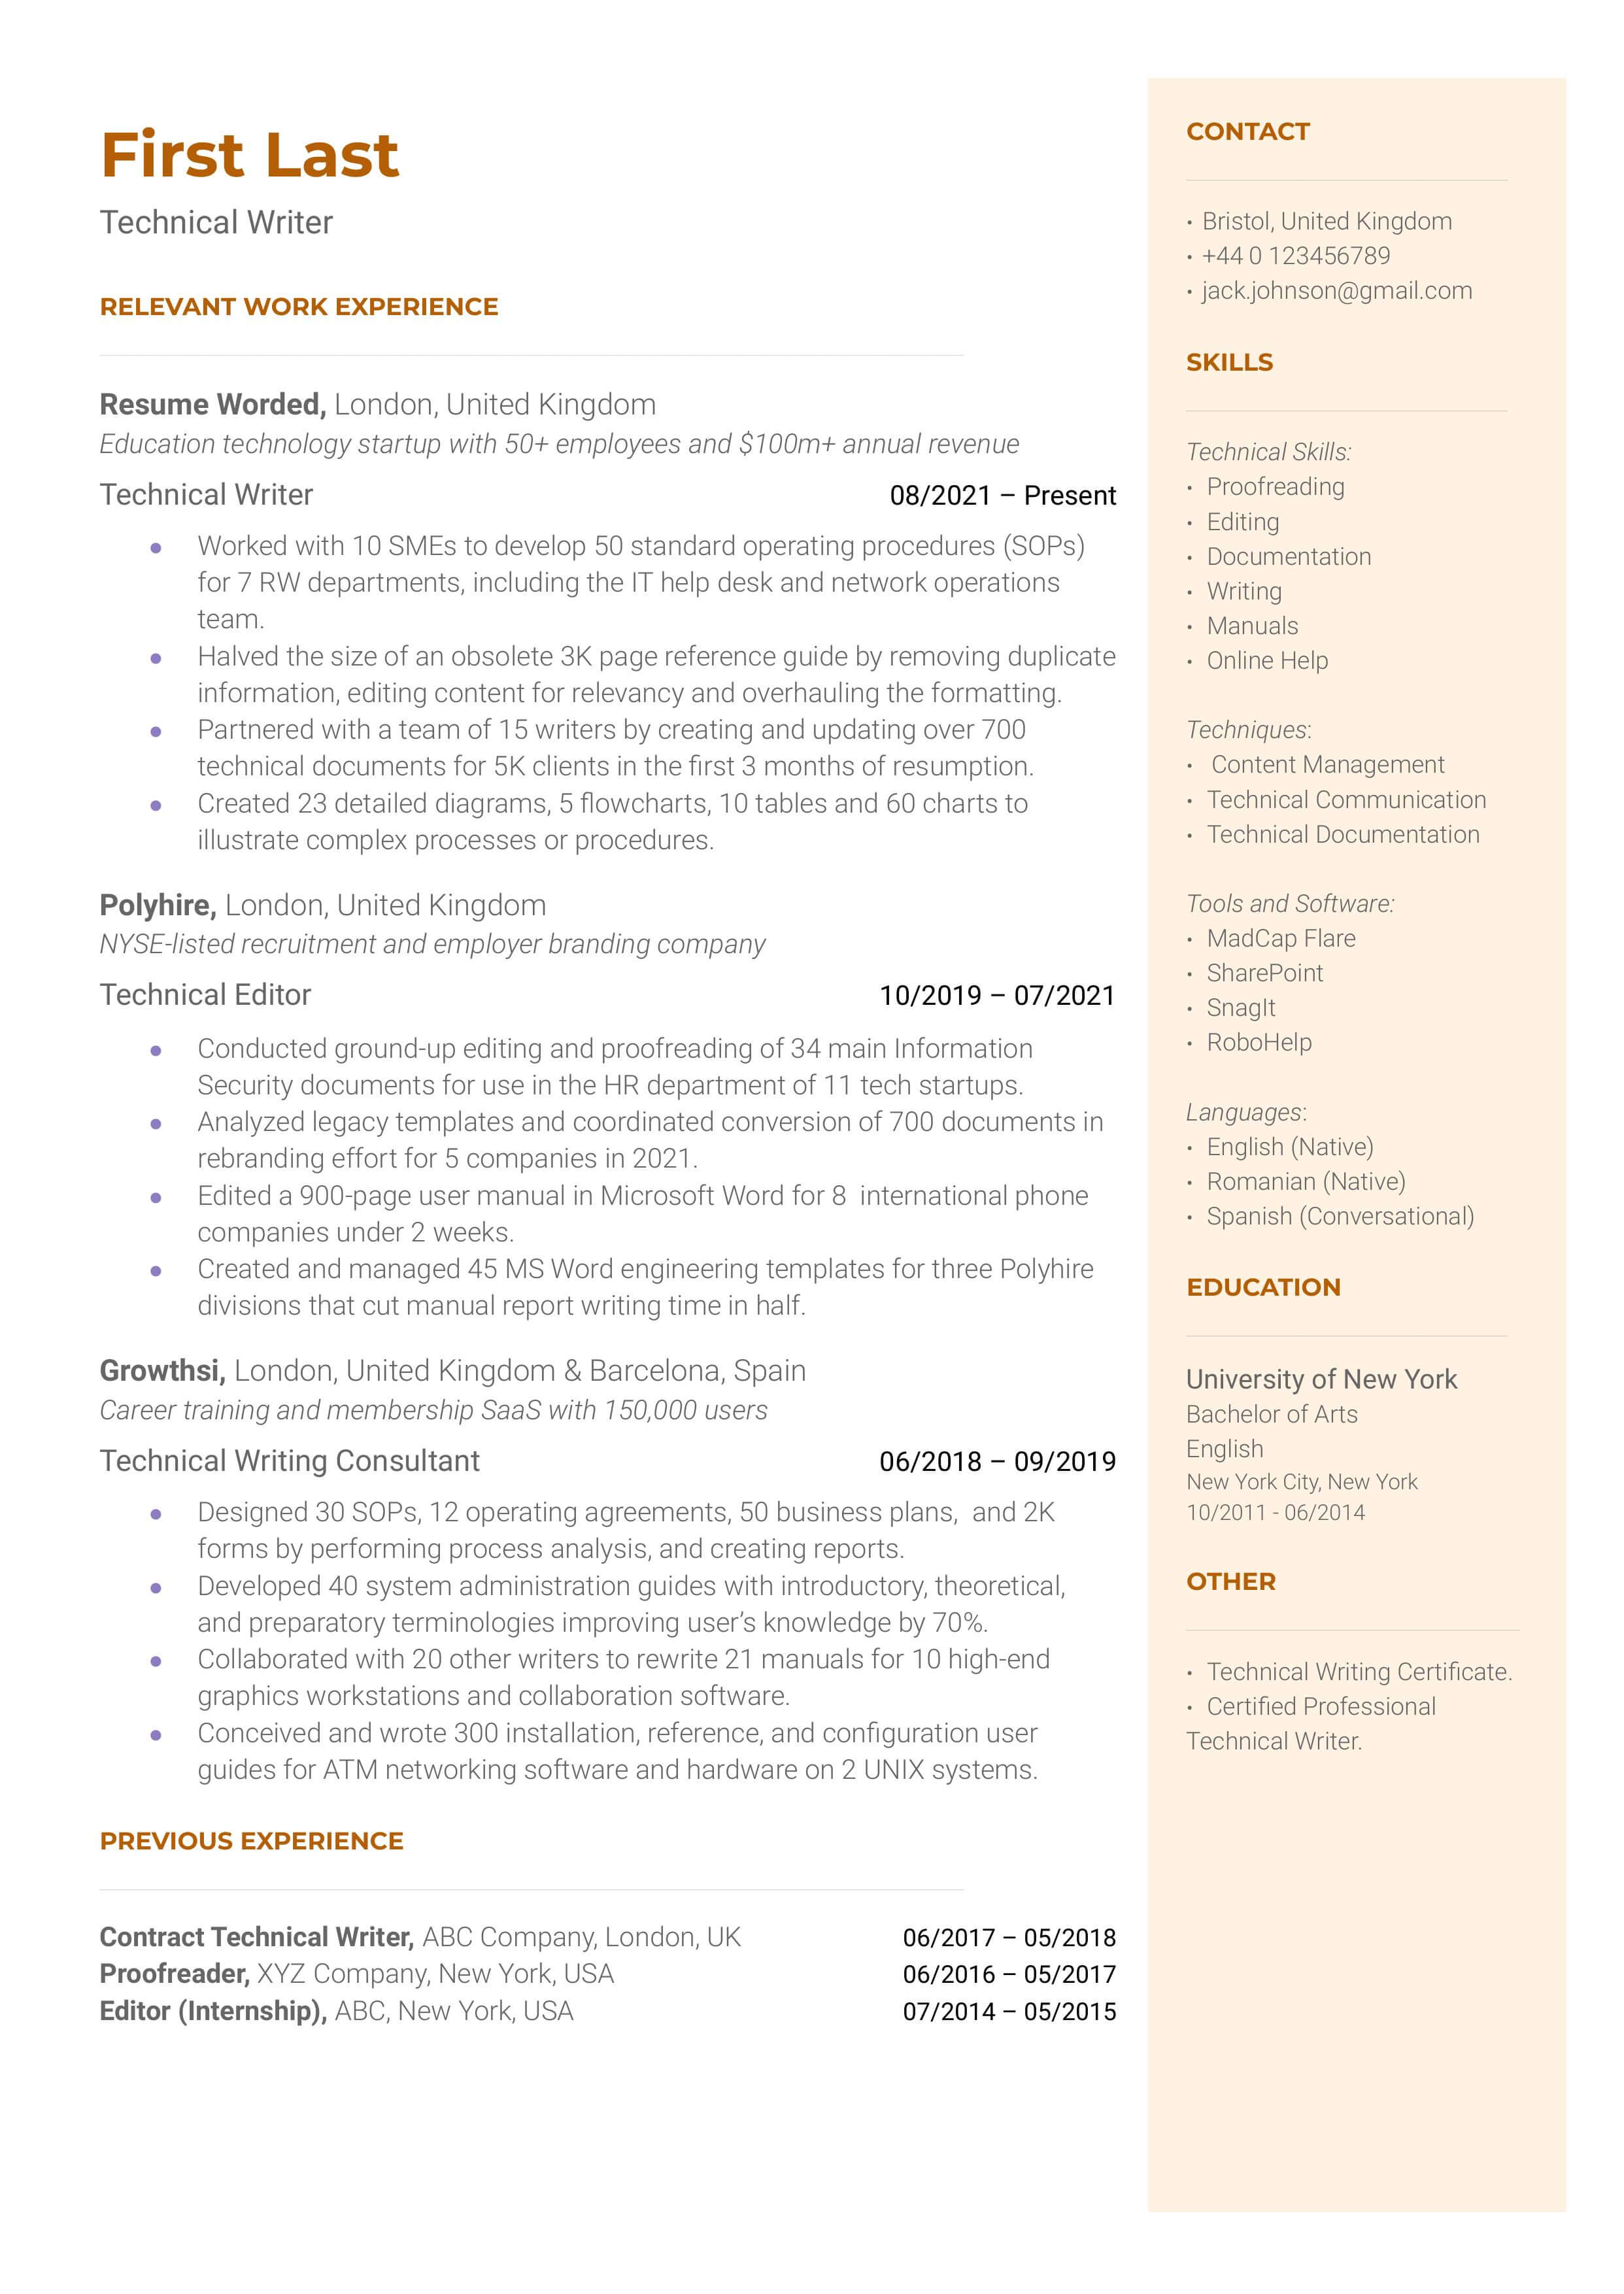 An organized CV showcasing proficiency in technical writing and understanding of technical domains.